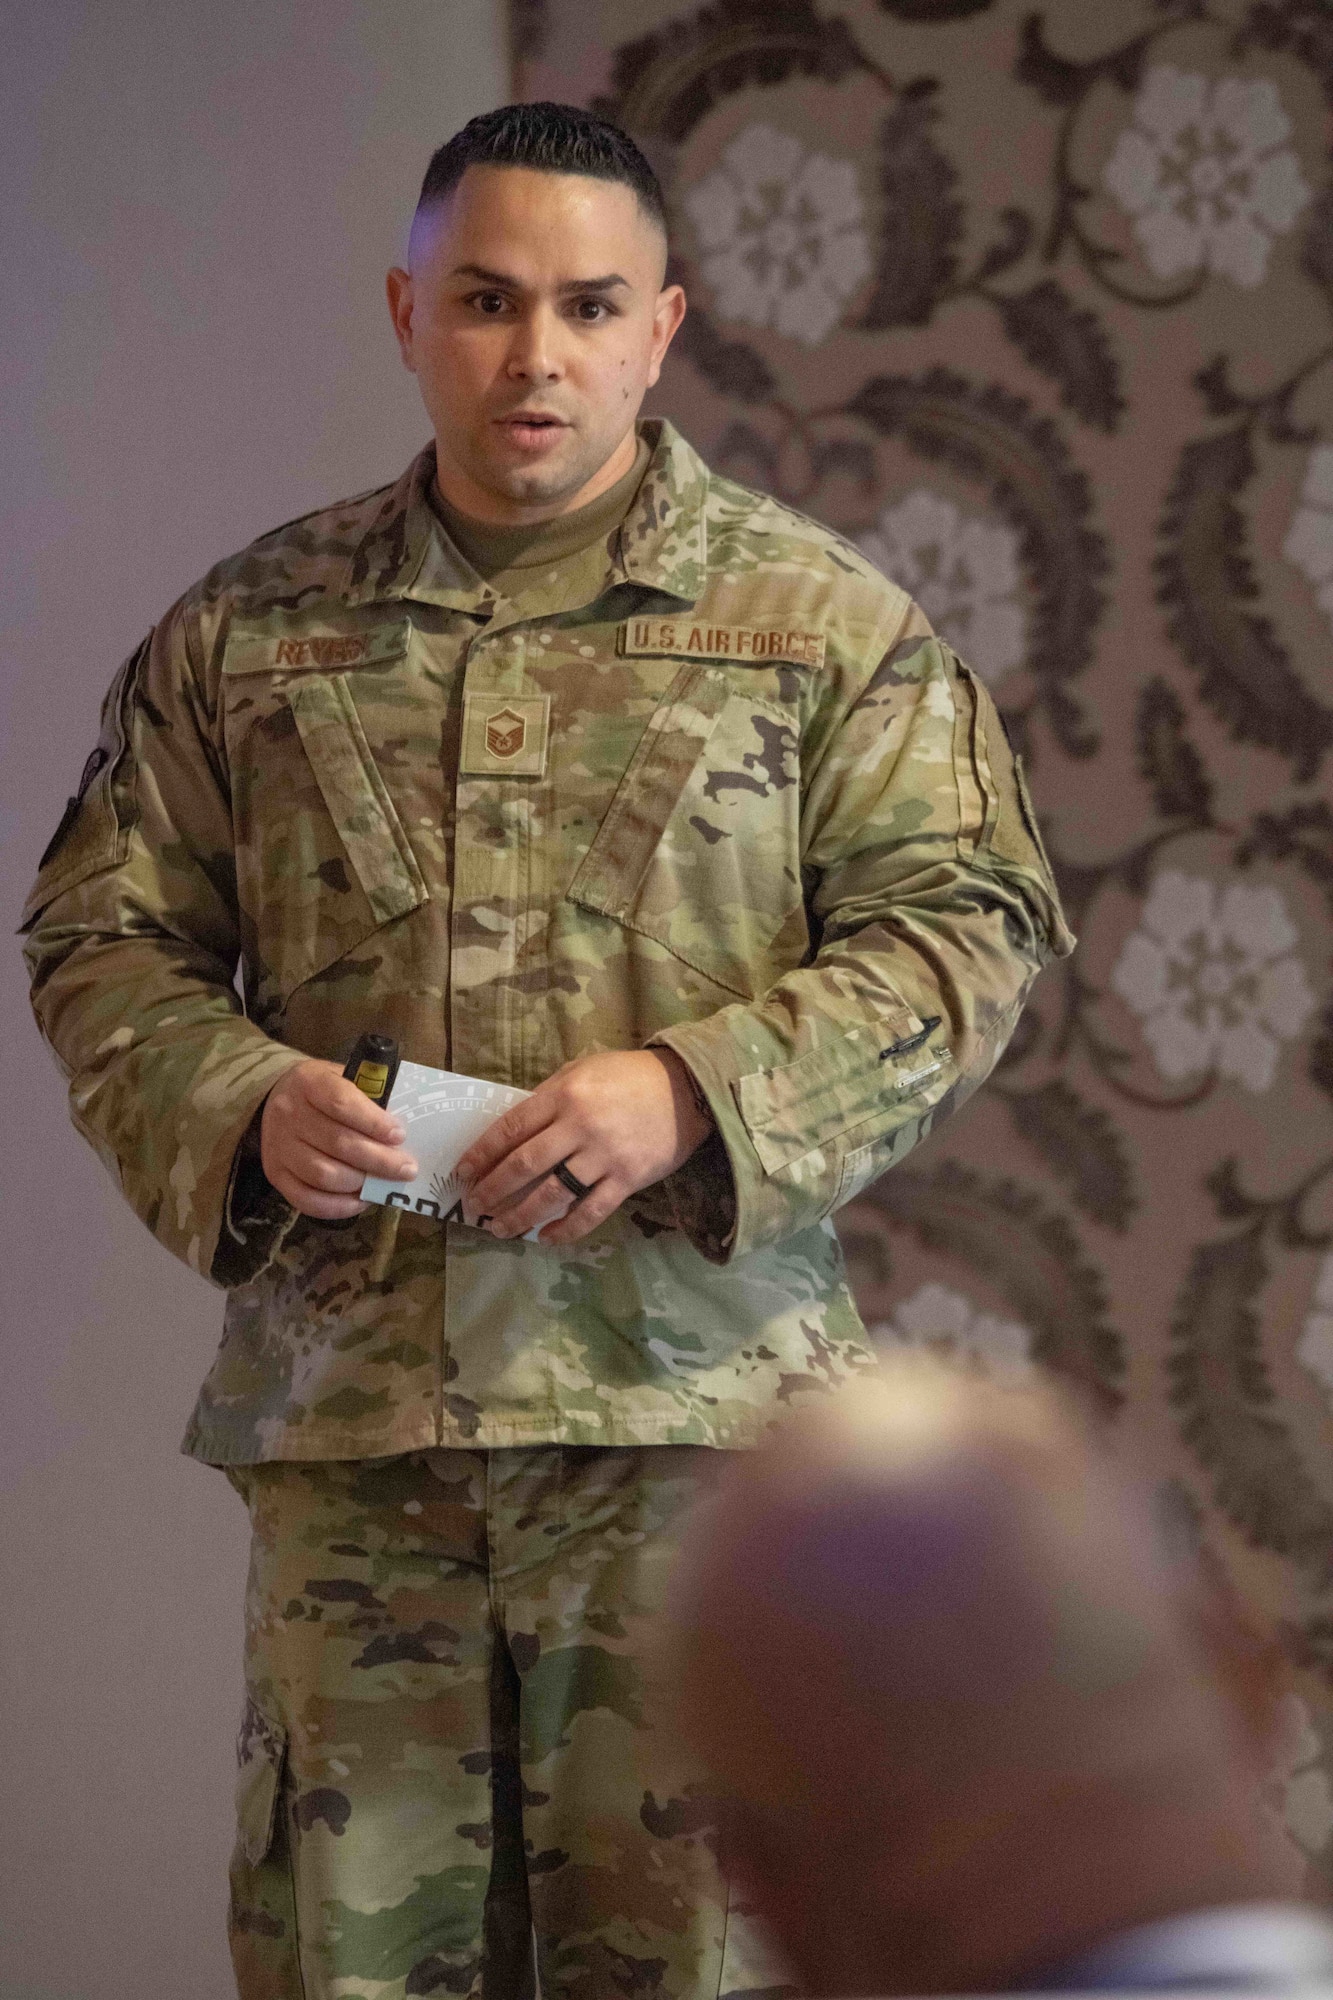 Maxwell AFB, Ala. – Master Sgt. Joel Rodriquez, from the 42nd Security Forces Squadron, pitches his Automated Installation Access Control Points innovation during Spark at the Max, April 14, 2022. The event gave Airmen and Guardians an opportunity to pitch creative and problem-solving ideas that increase readiness, recover Airmen’s time, reduce cost, or enhance the lethality of the force. (US Air Force photo by Melanie Rodgers Cox/Released)